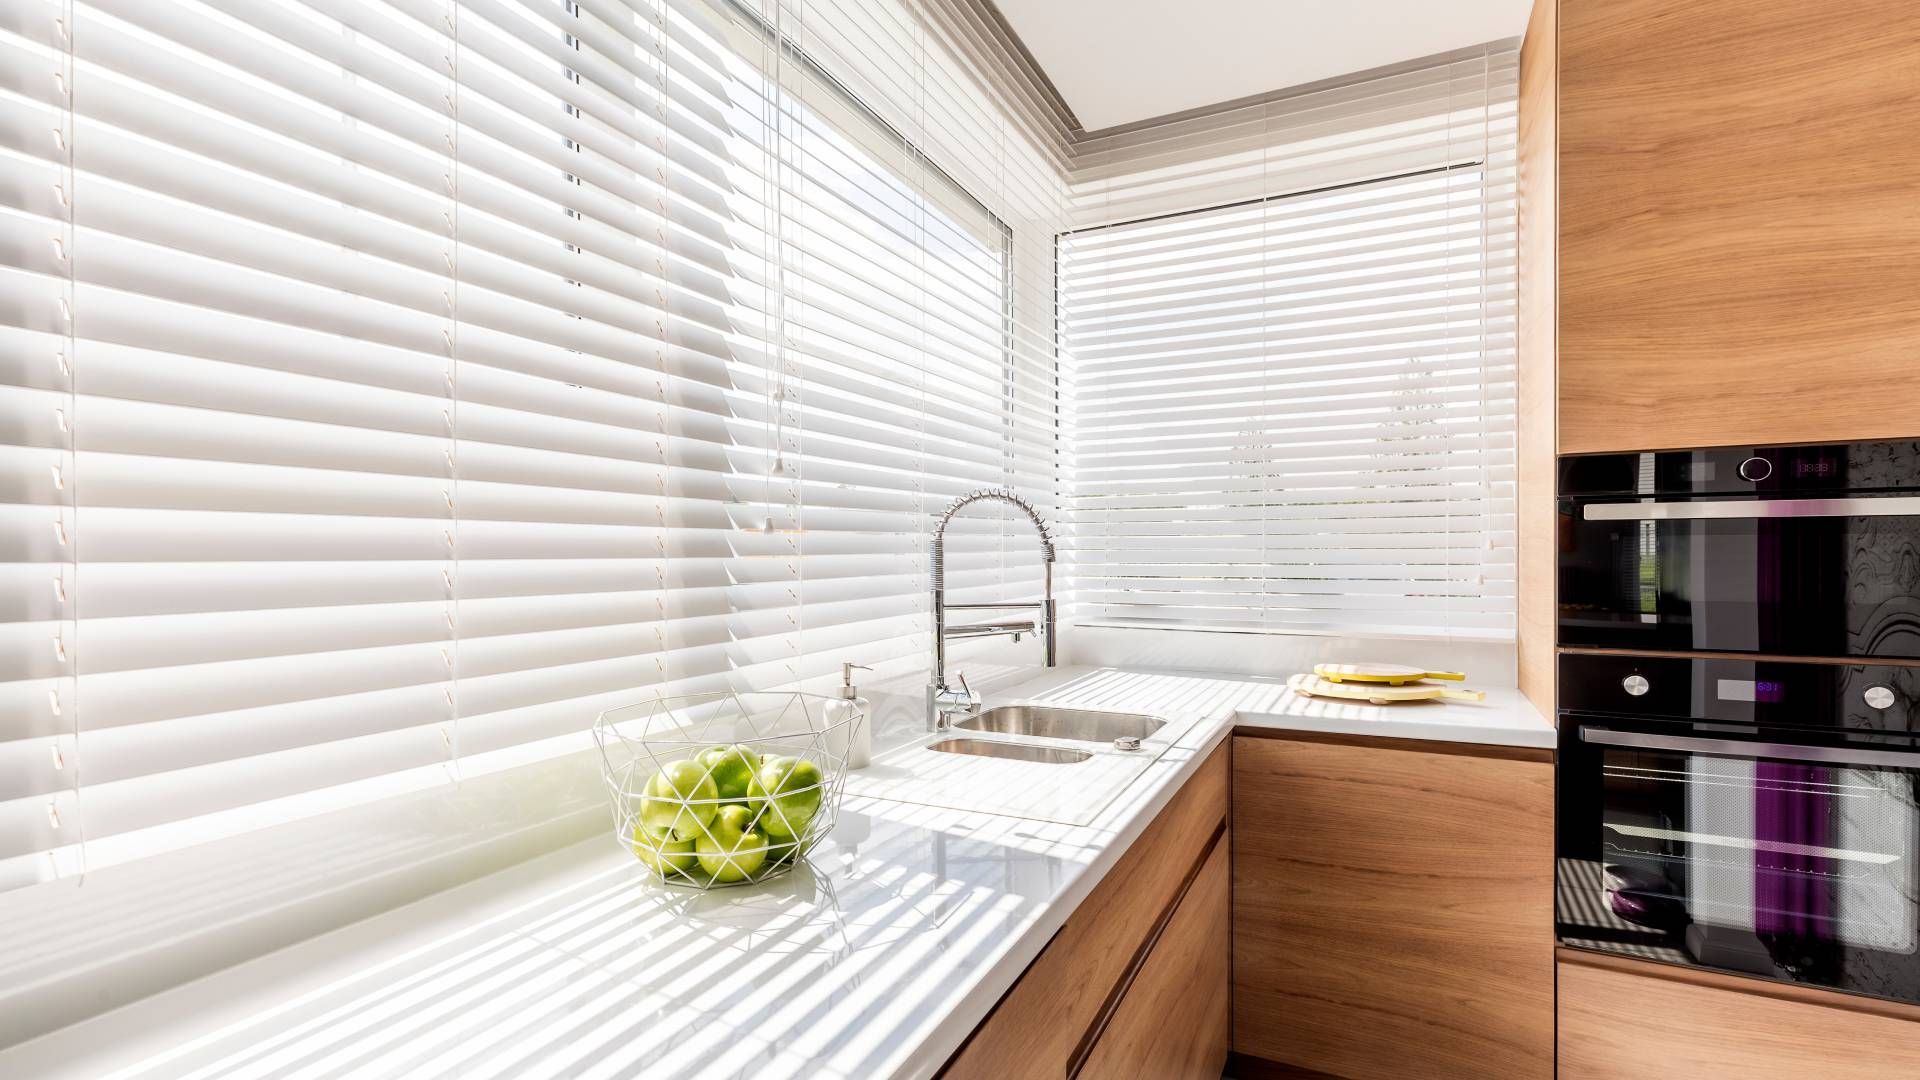 Horizontal Blinds near Haddon Heights, New Jersey (NJ), featuring sunlight in a kitchen